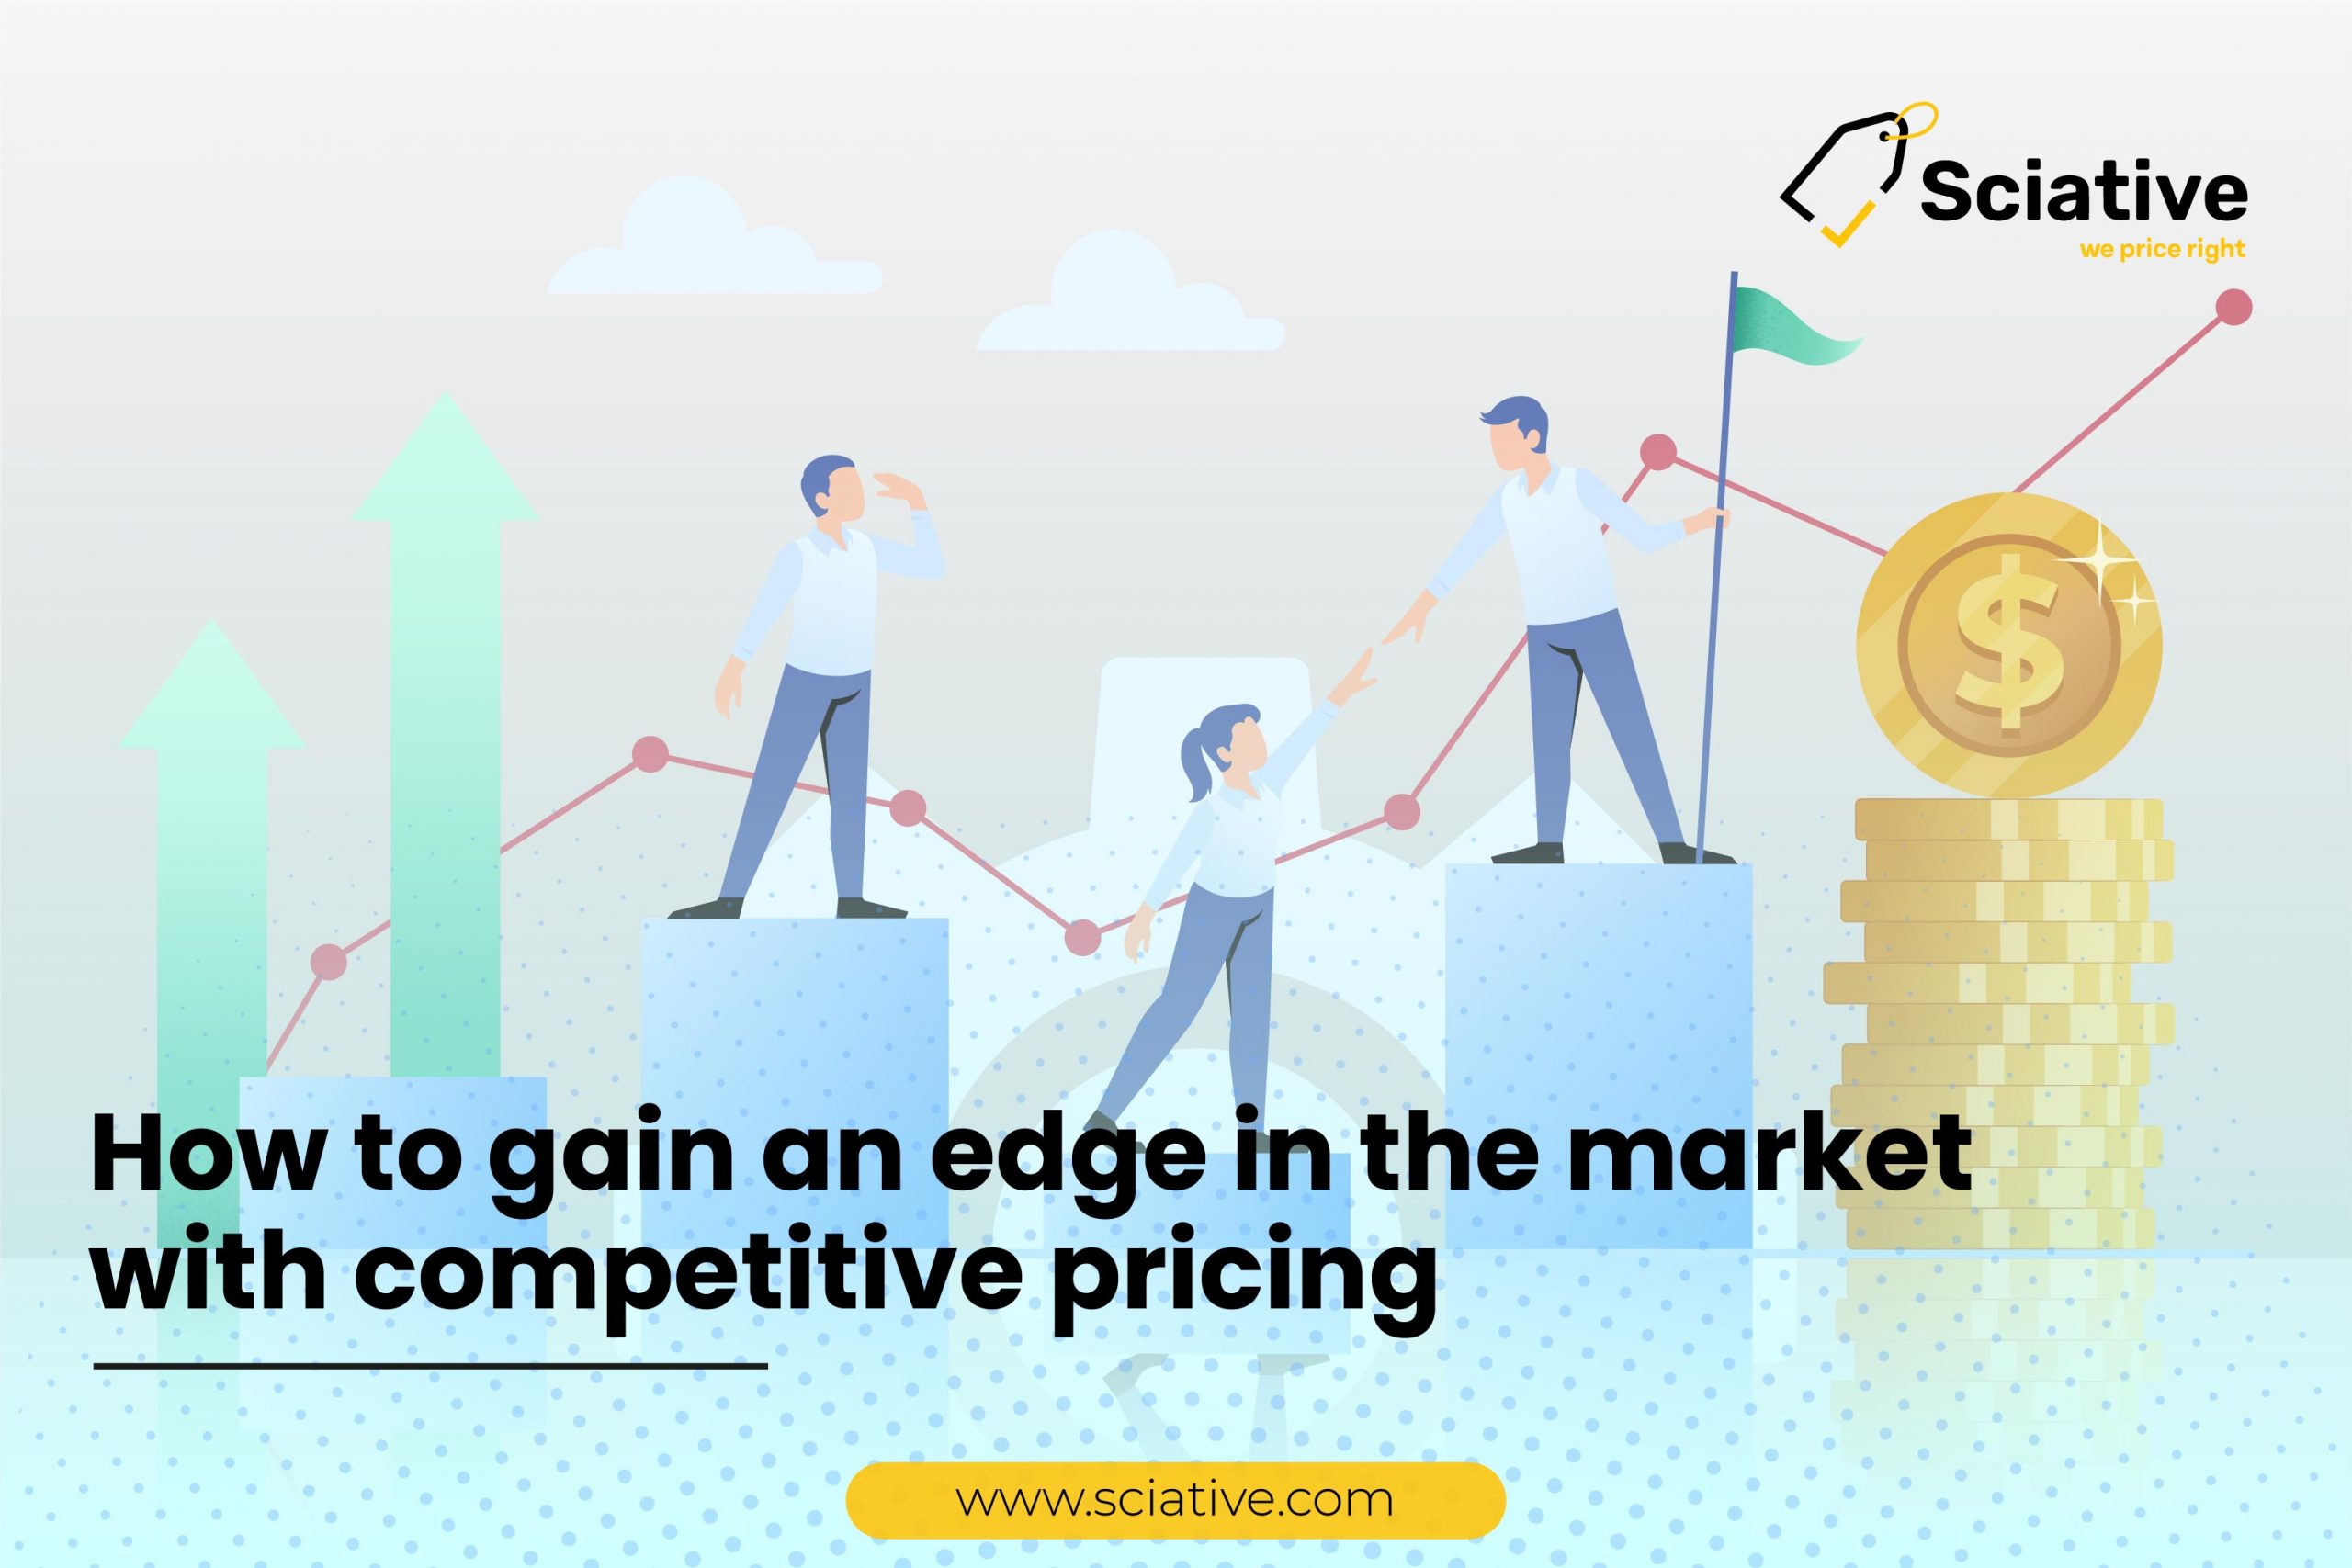 How to gain an edge in the market with competitive pricing